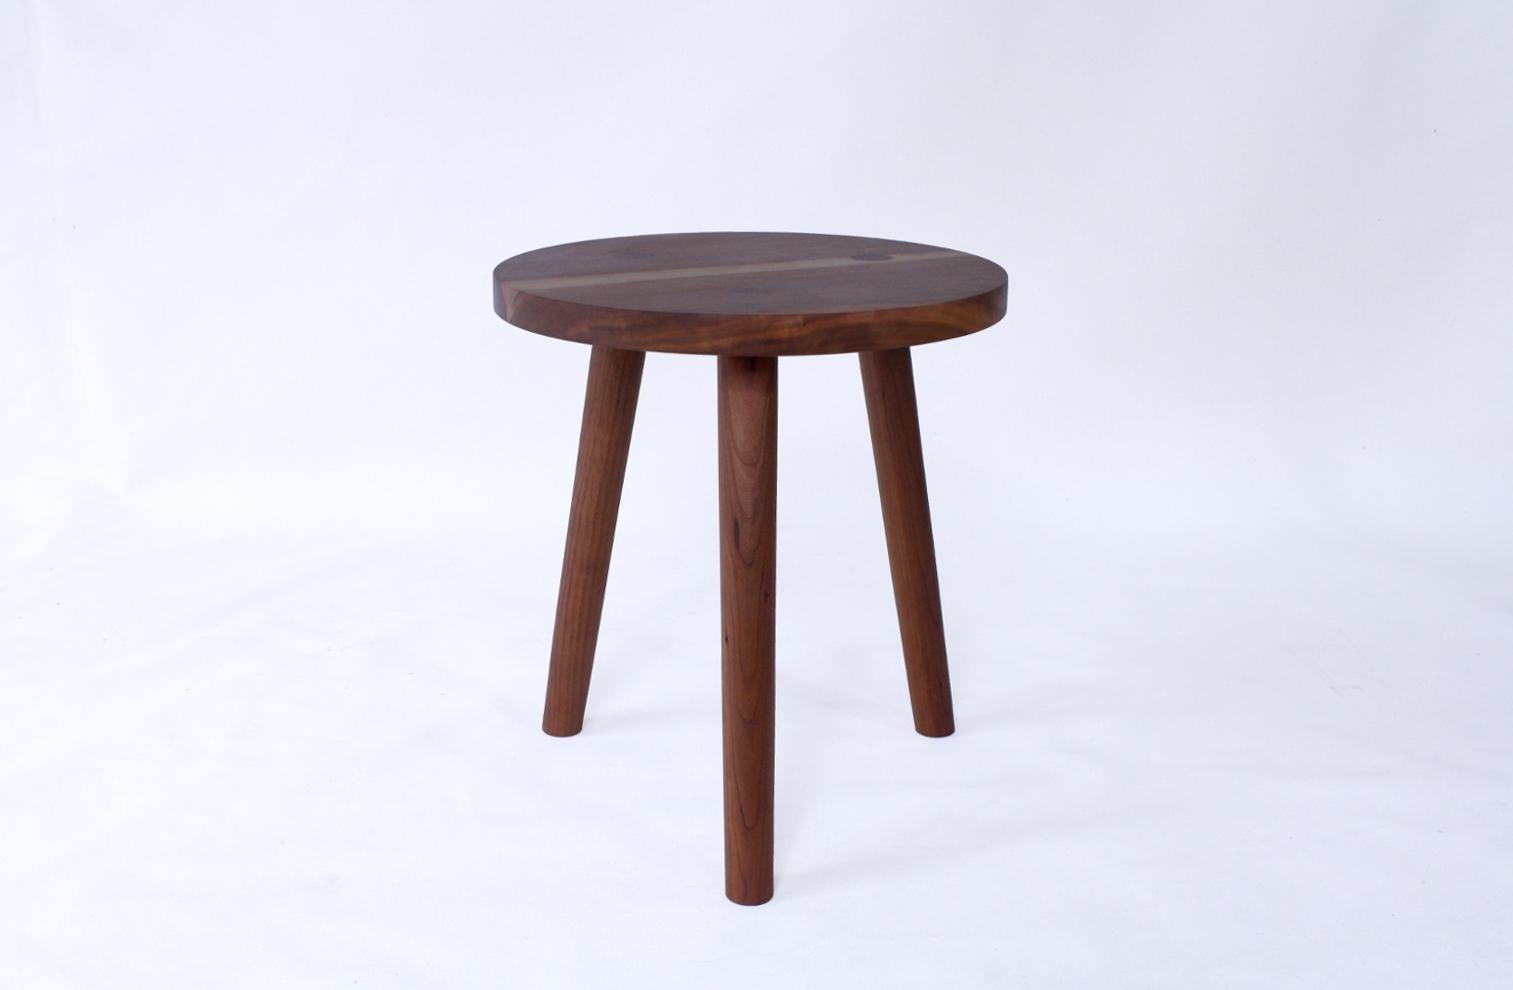 Bare a Handmade Wood Side Table with Inset Merino Felt by Laylo For Sale 5